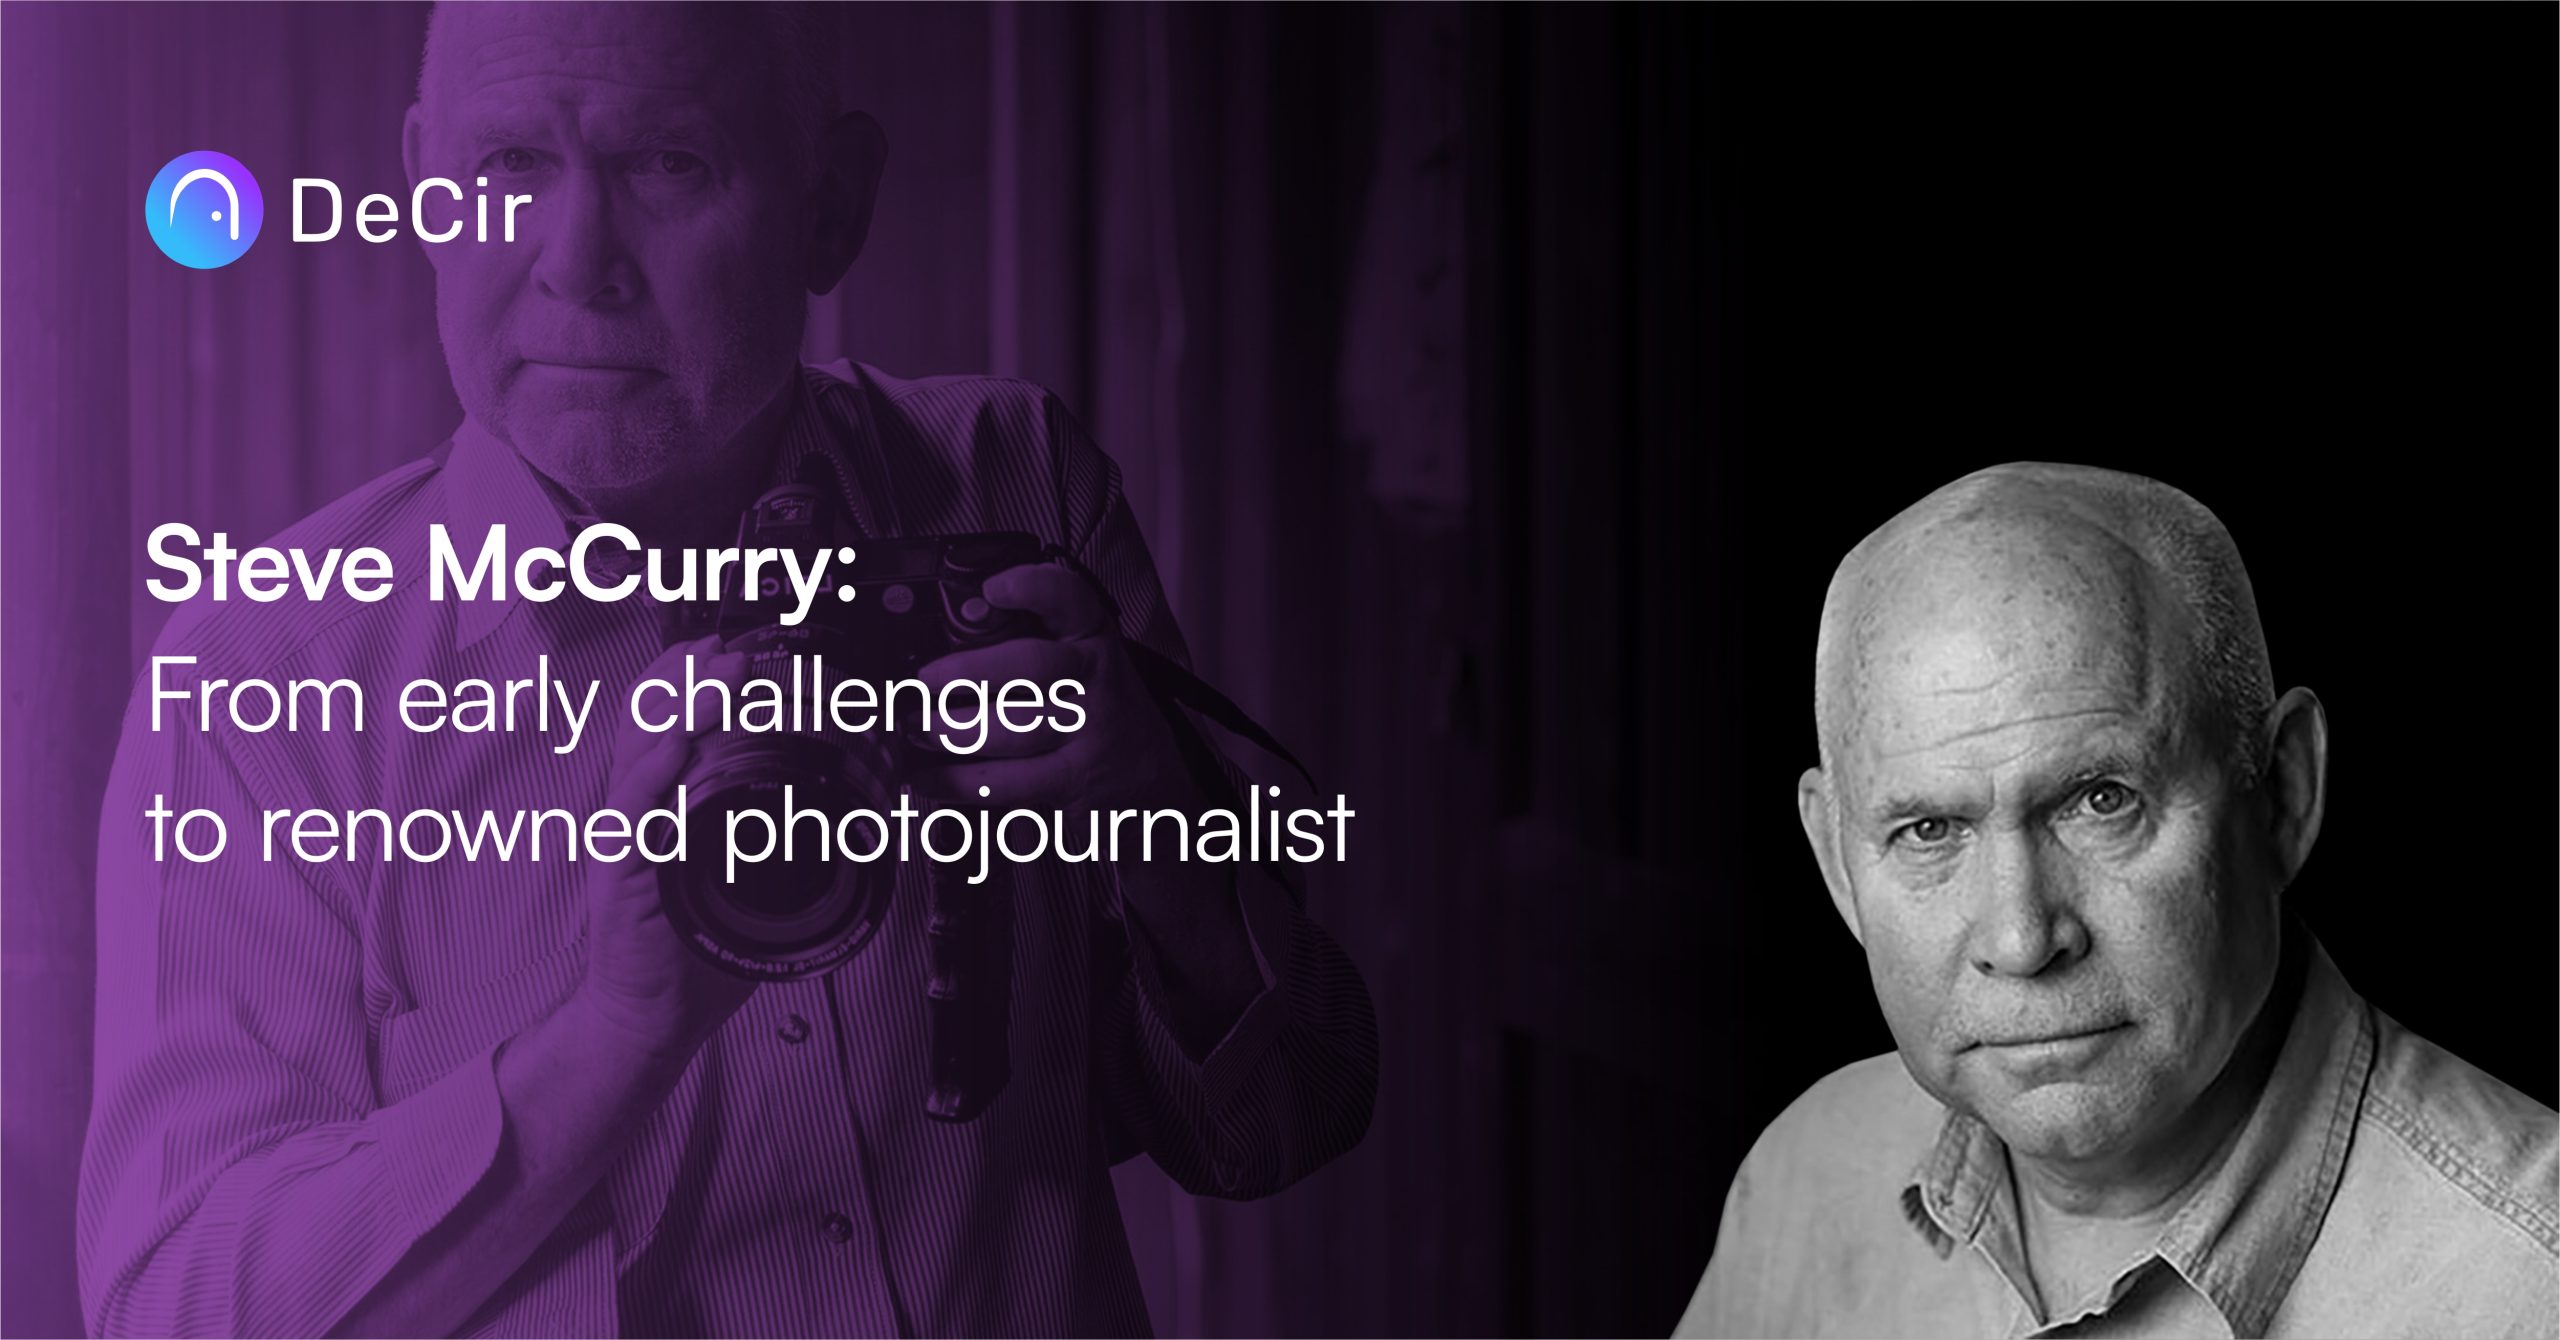 Steve McCurry: From Early Challenges to renowned photojournalist